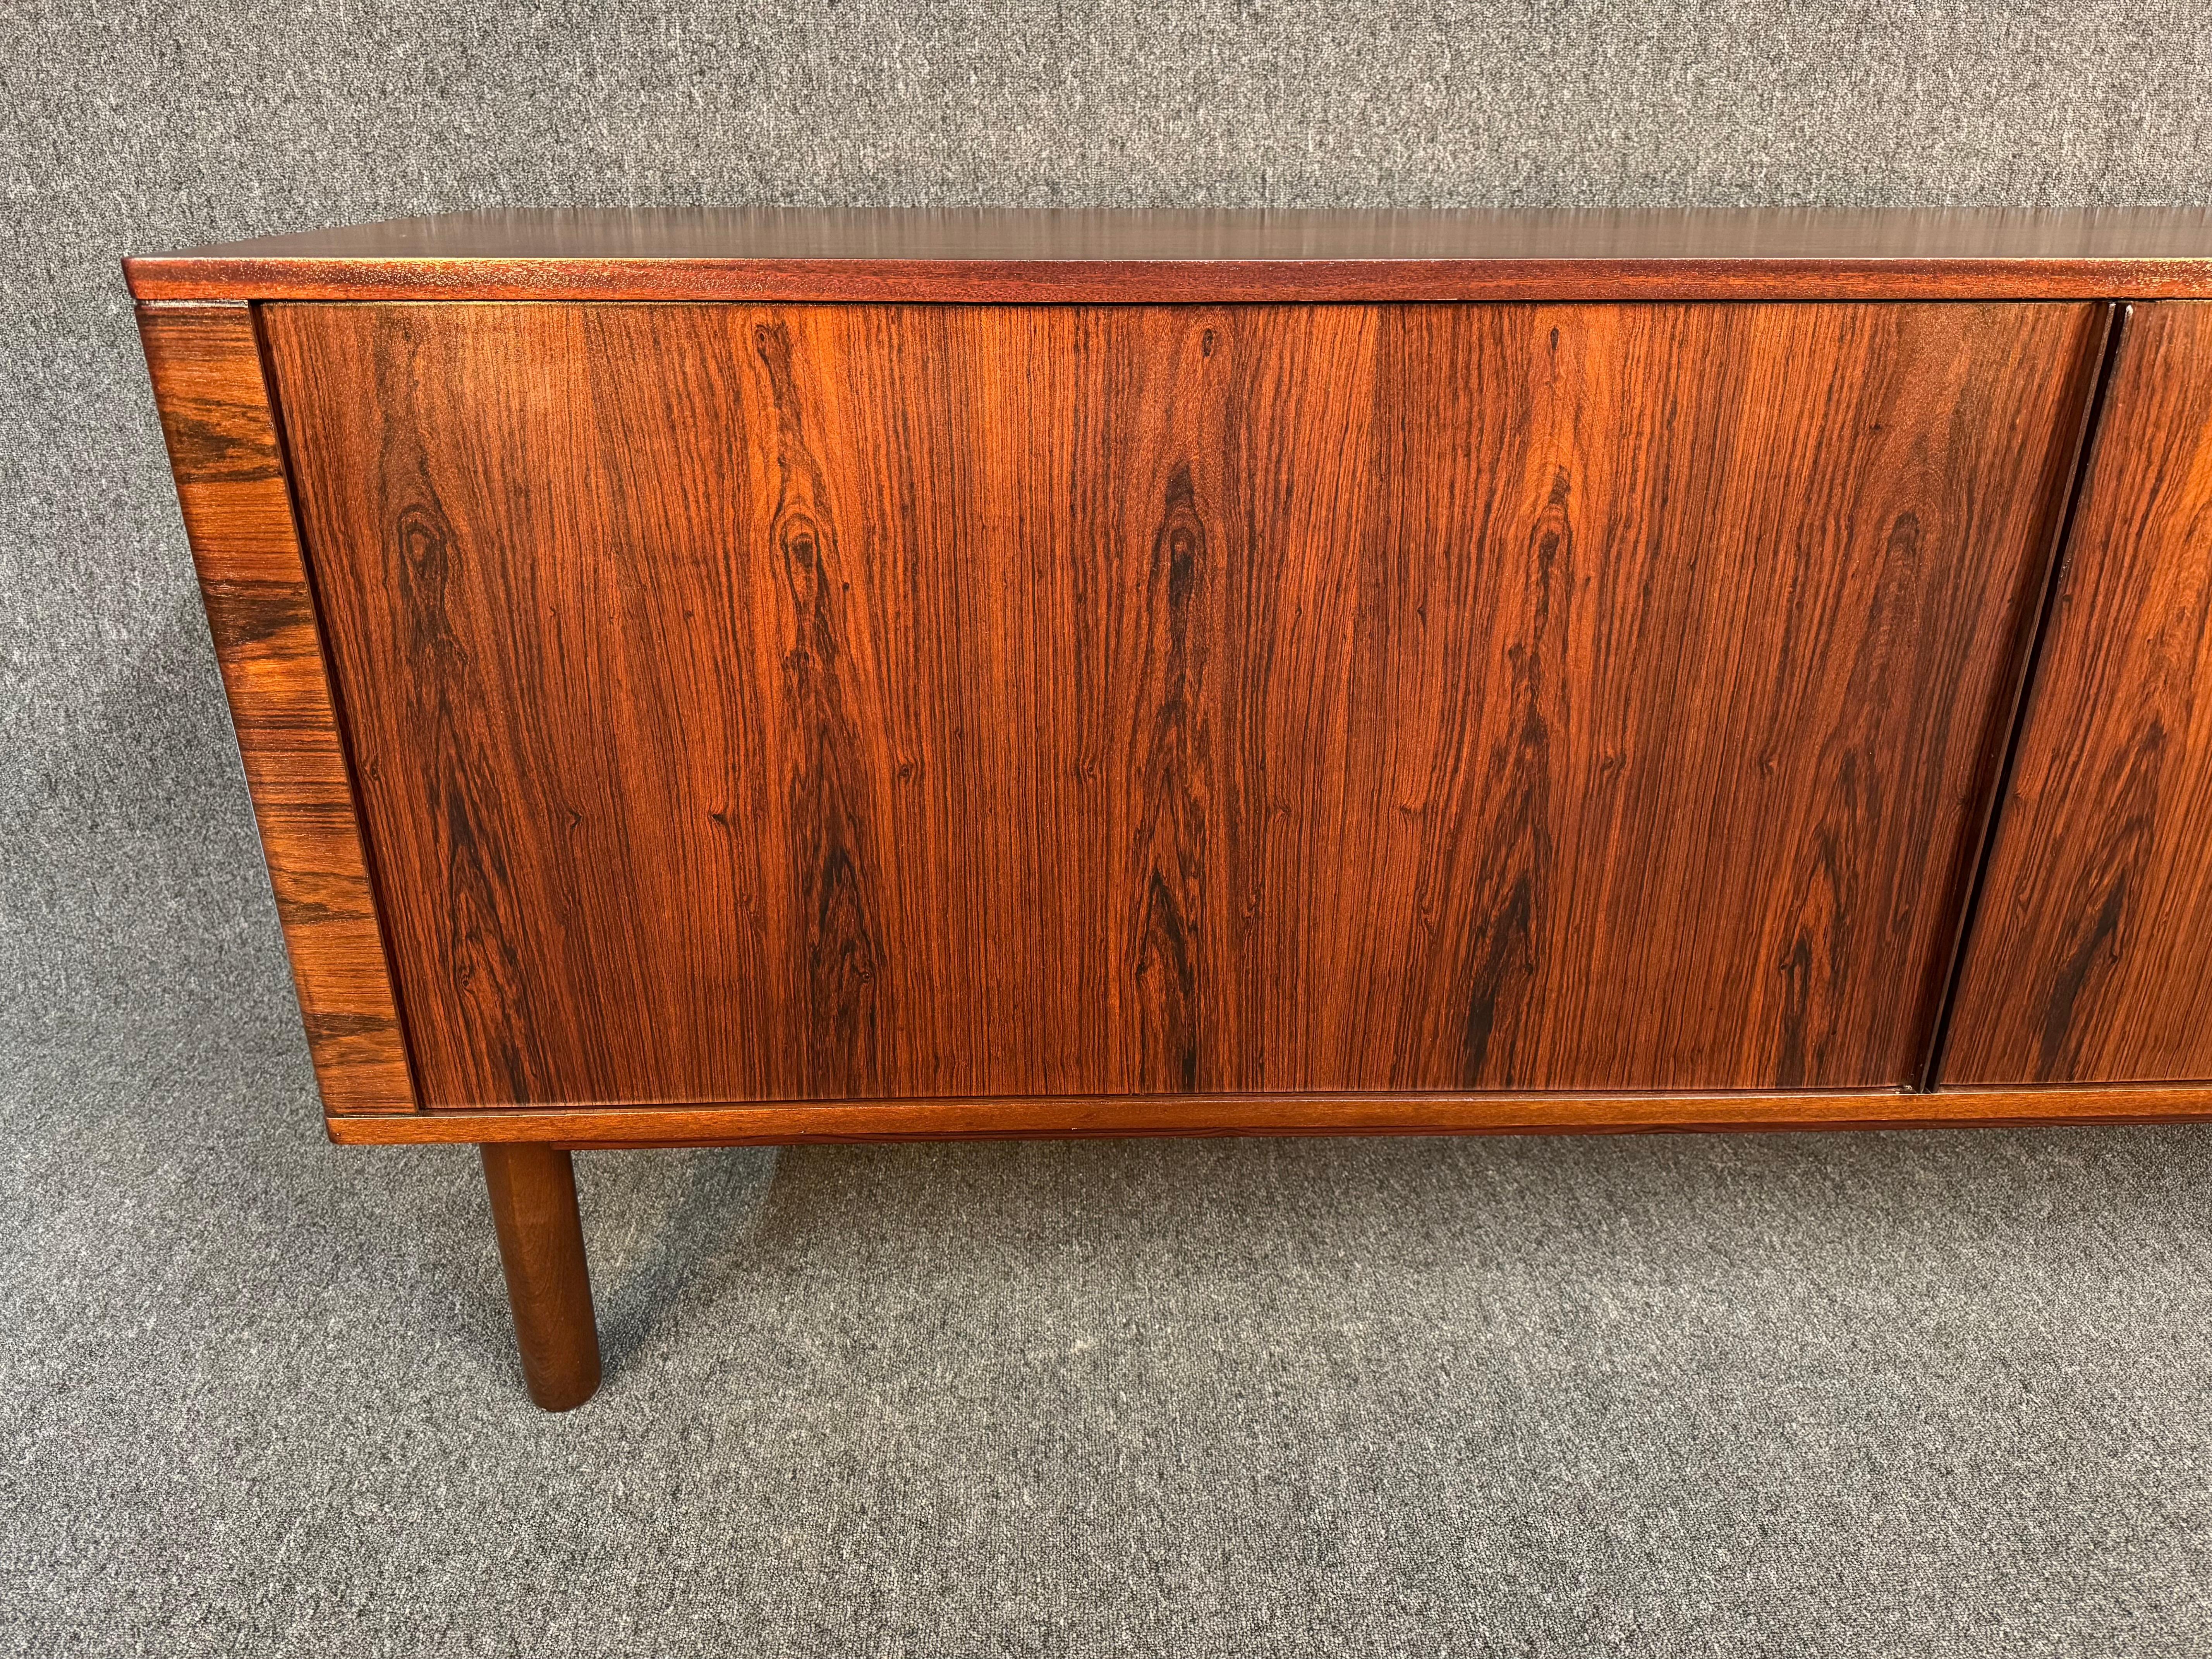 Here is a rare and beautiful Scandinavian modern sideboard in rosewood manufactured by Hornslet Mobelkfabrik in Denmark in the 1960's.
This lovely piece, recently imported from Europe to California before its refinishing, features a vibrant wood